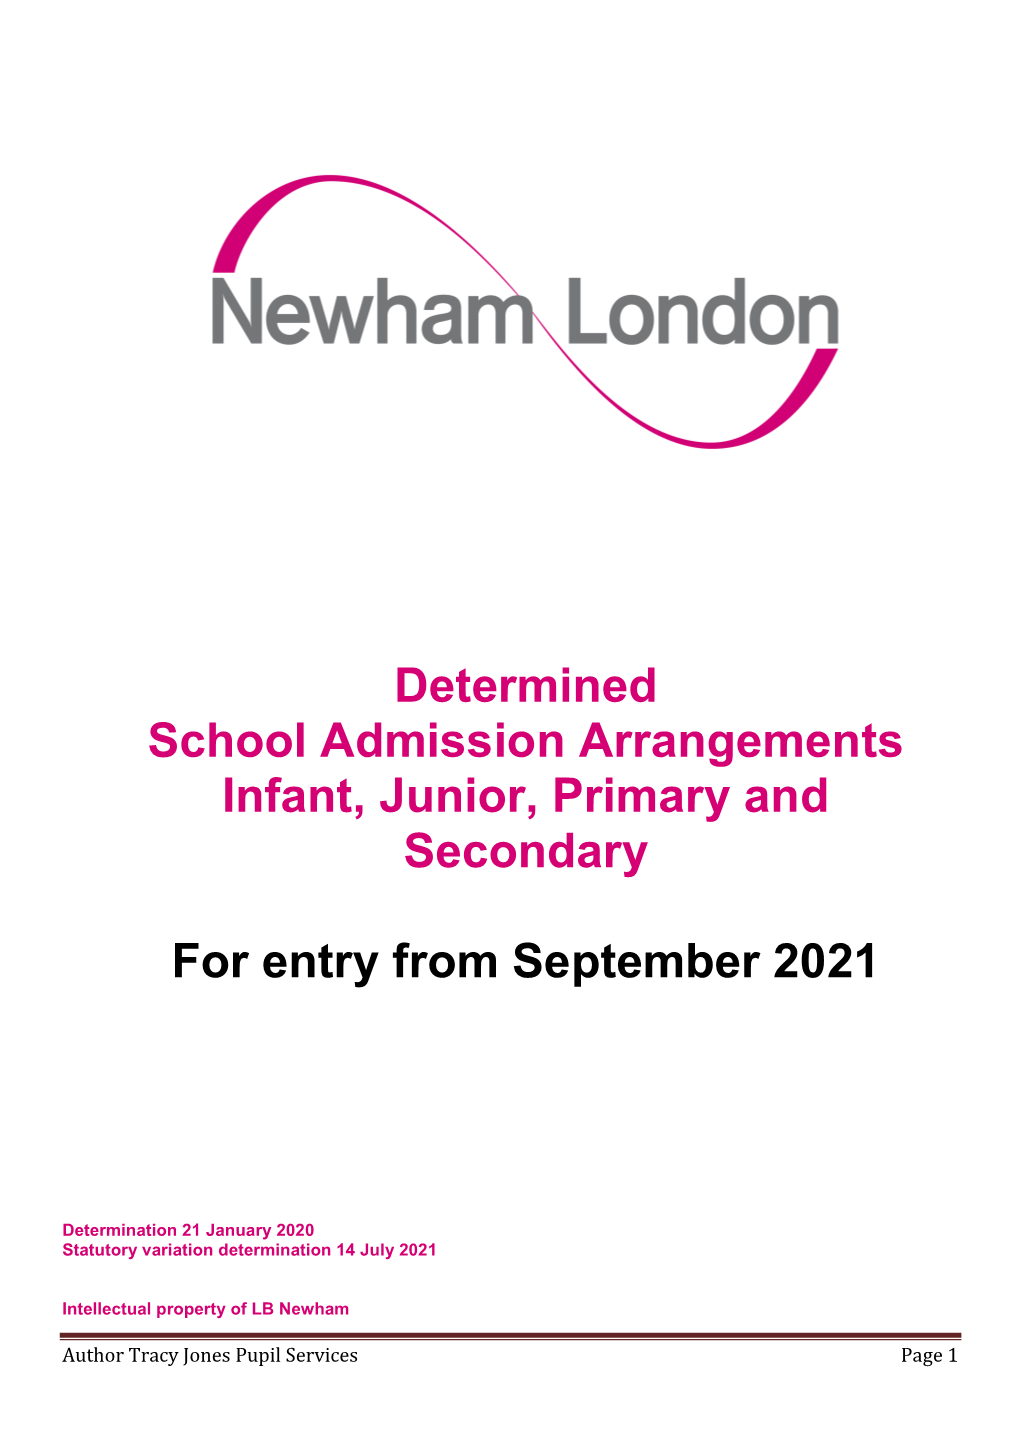 Determined School Admission Arrangements Infant, Junior, Primary and Secondary